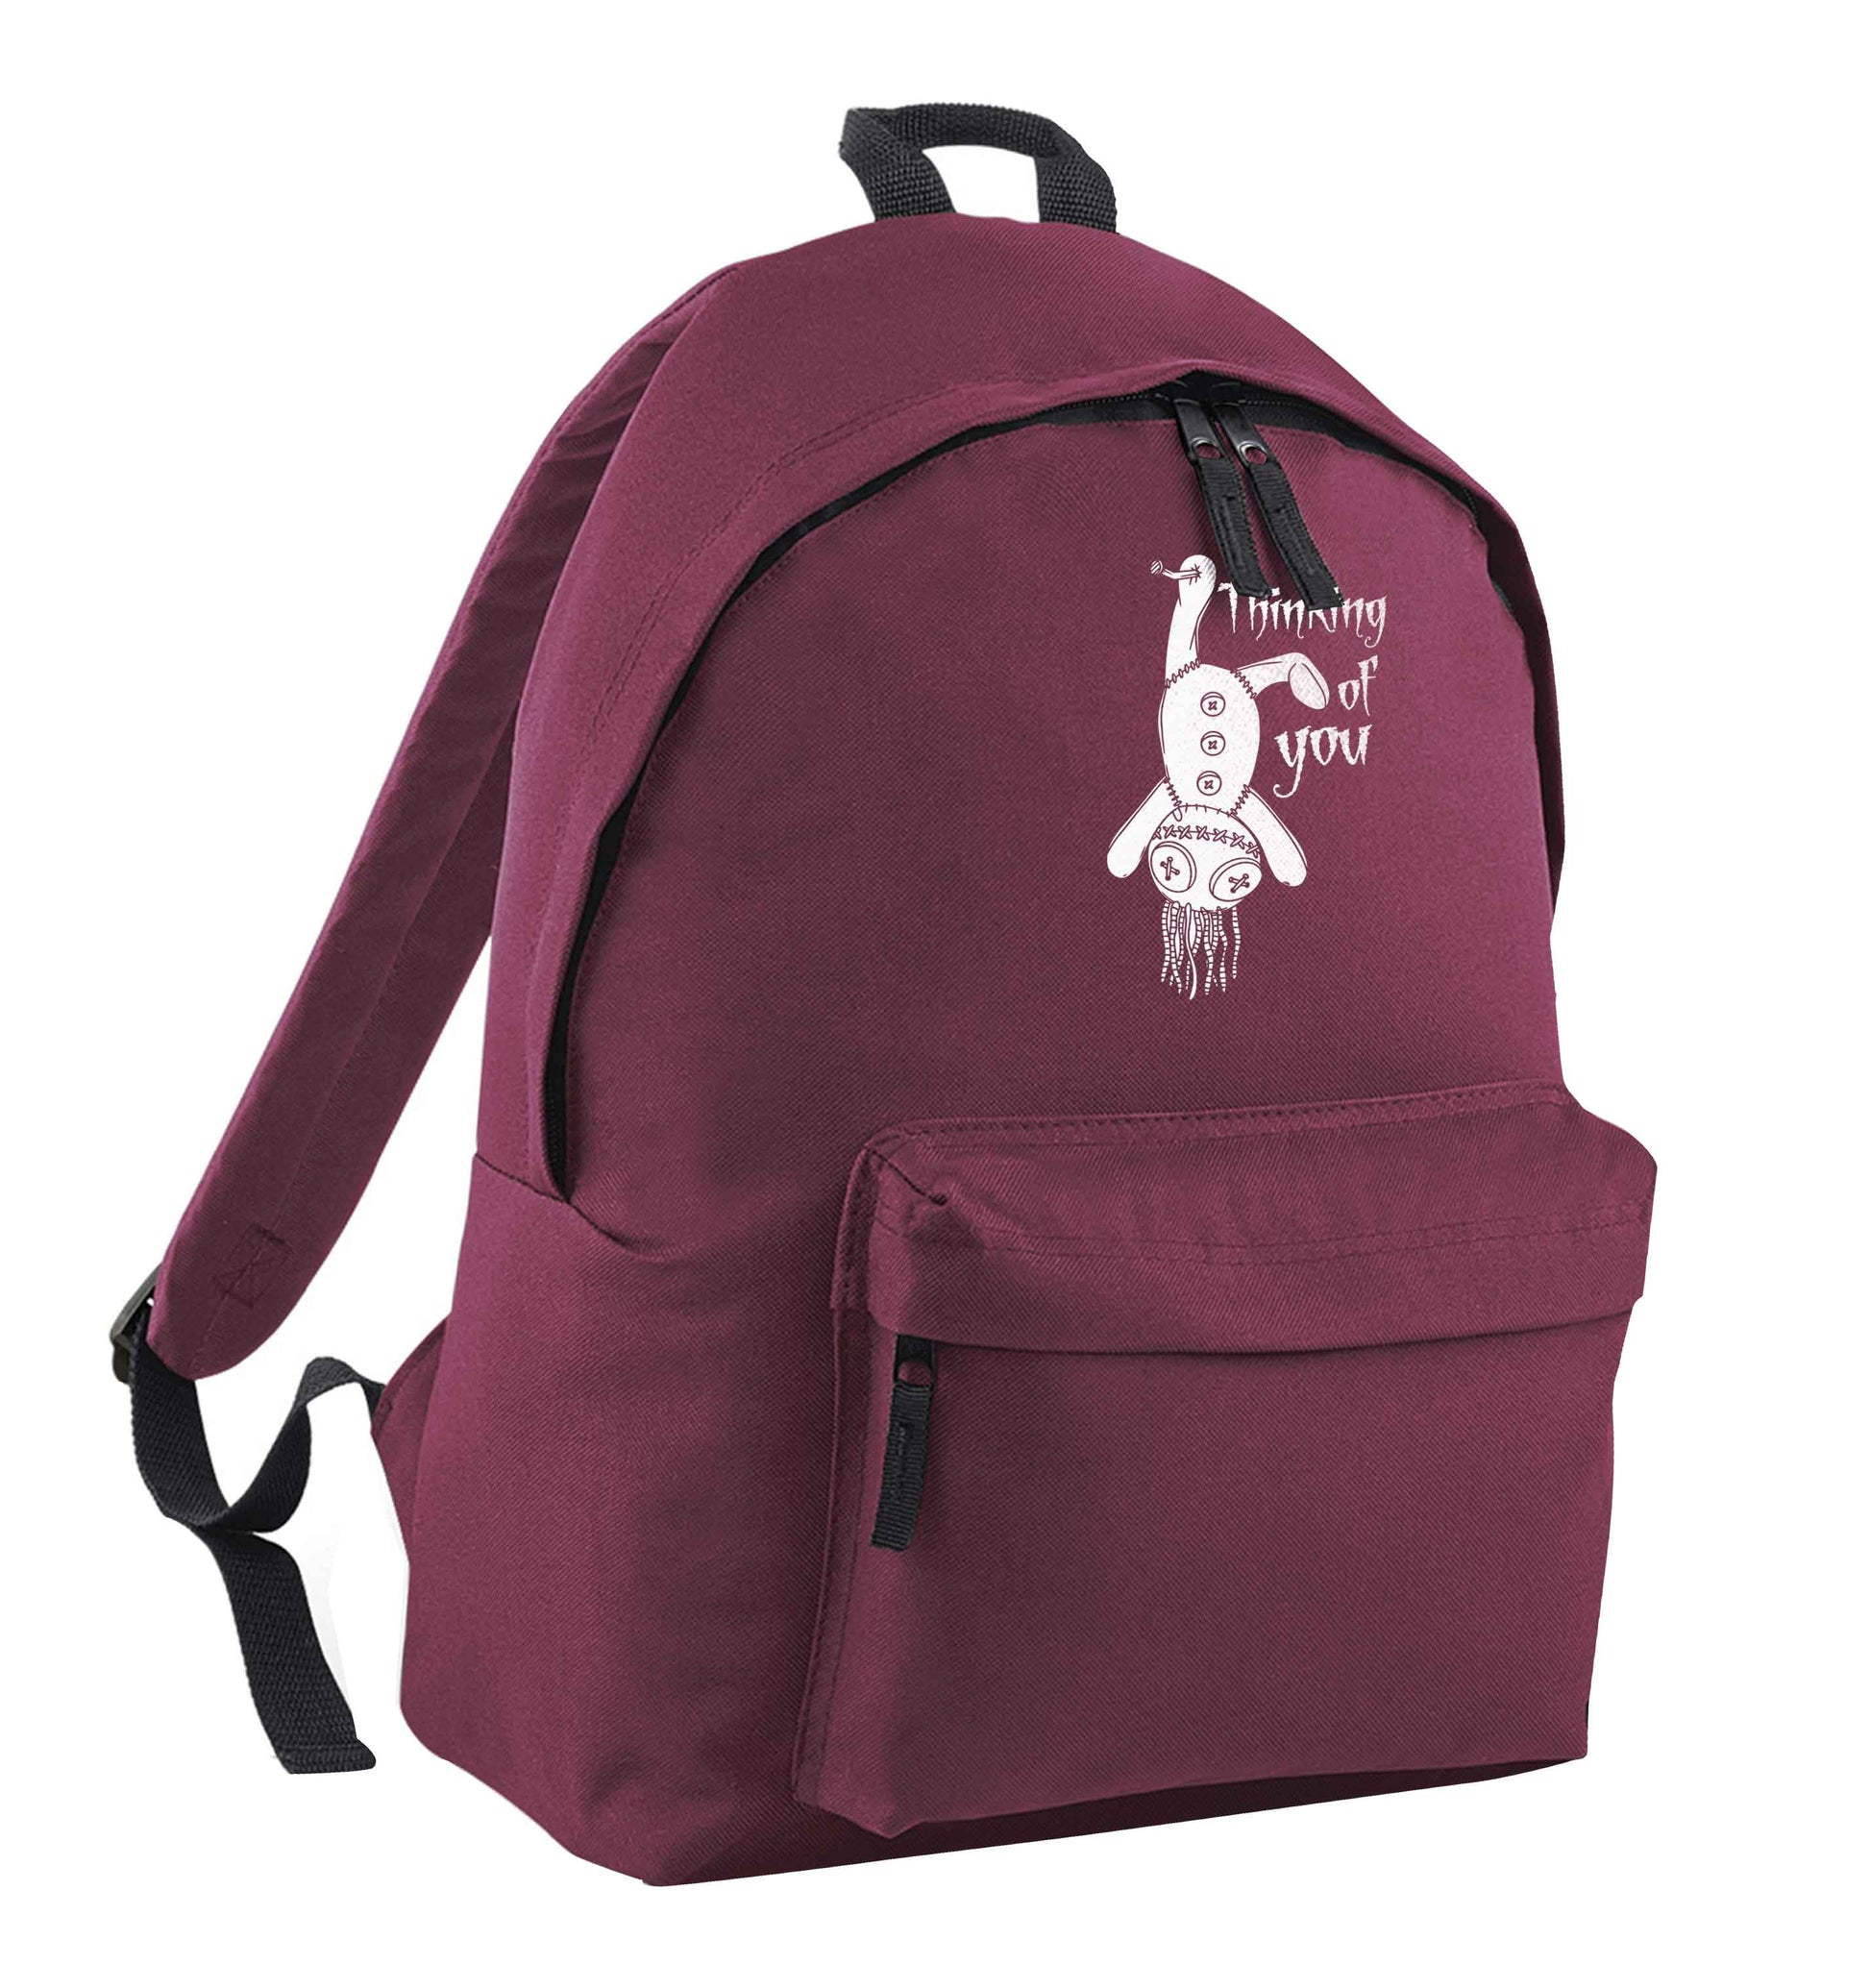 Thinking of you maroon adults backpack